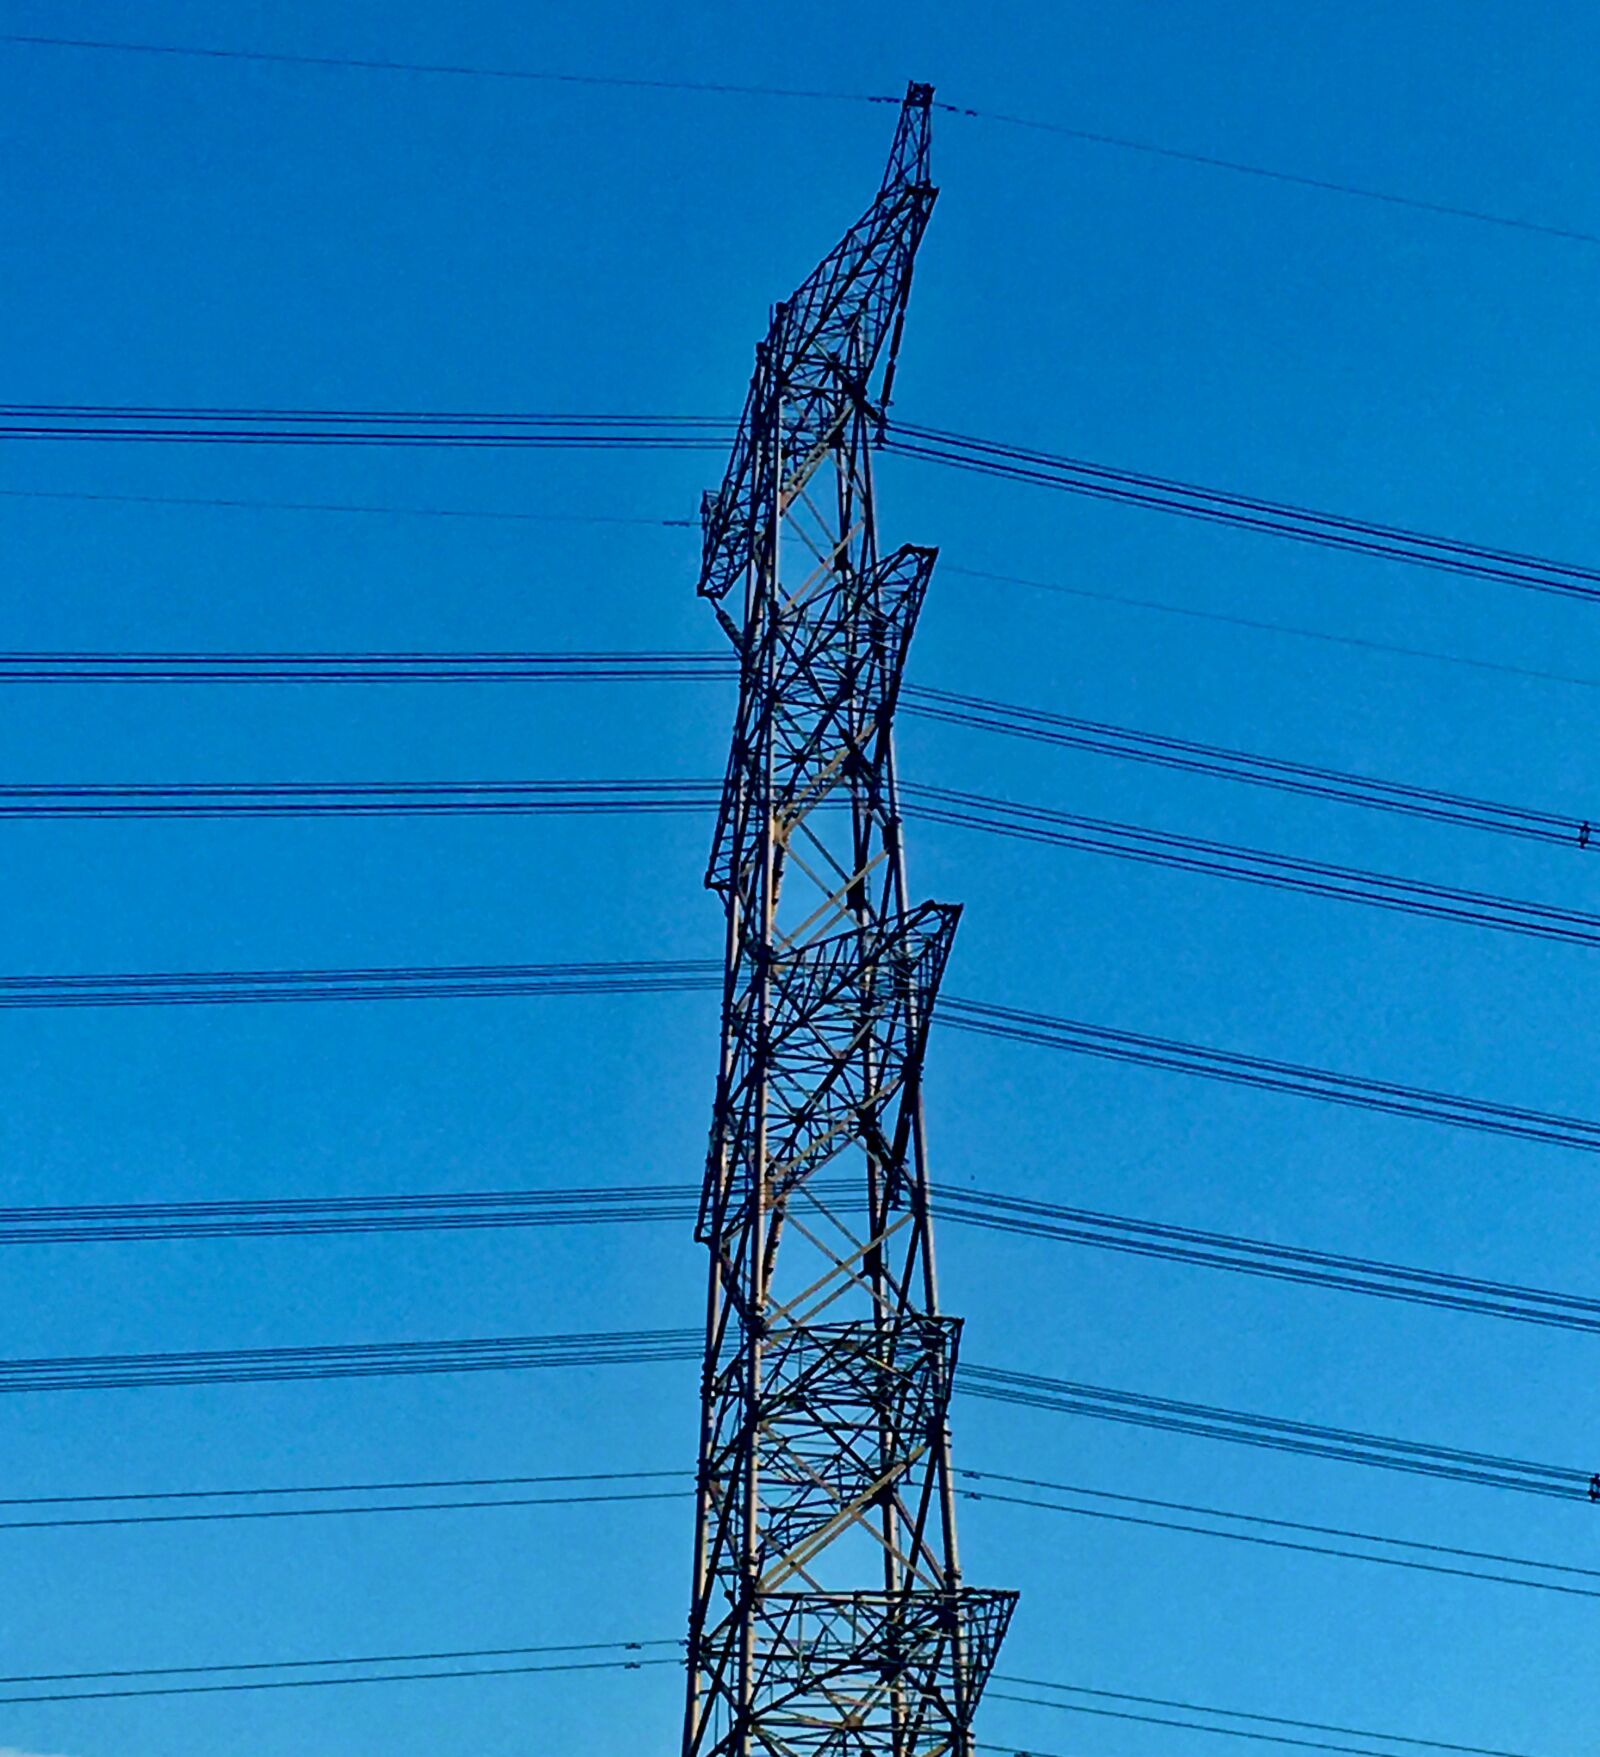 Apple iPhone 6s + iPhone 6s back camera 4.15mm f/2.2 sample photo. Power lines, sky, electricity photography